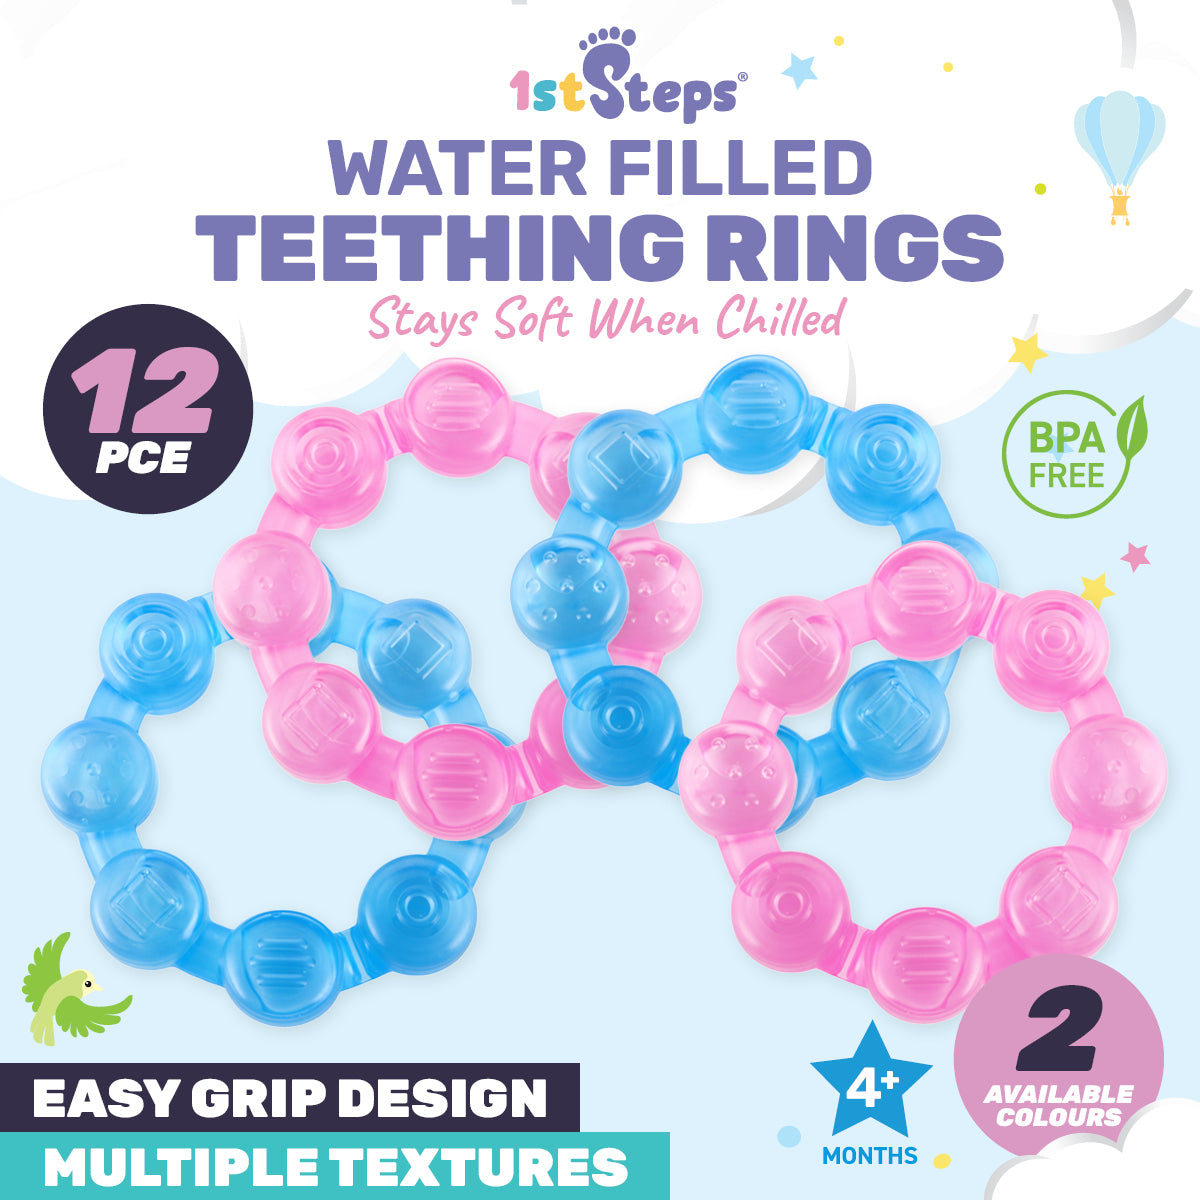 1st Steps 12PCE Textured Teething Rings Water Filled Soft Premium Silicone